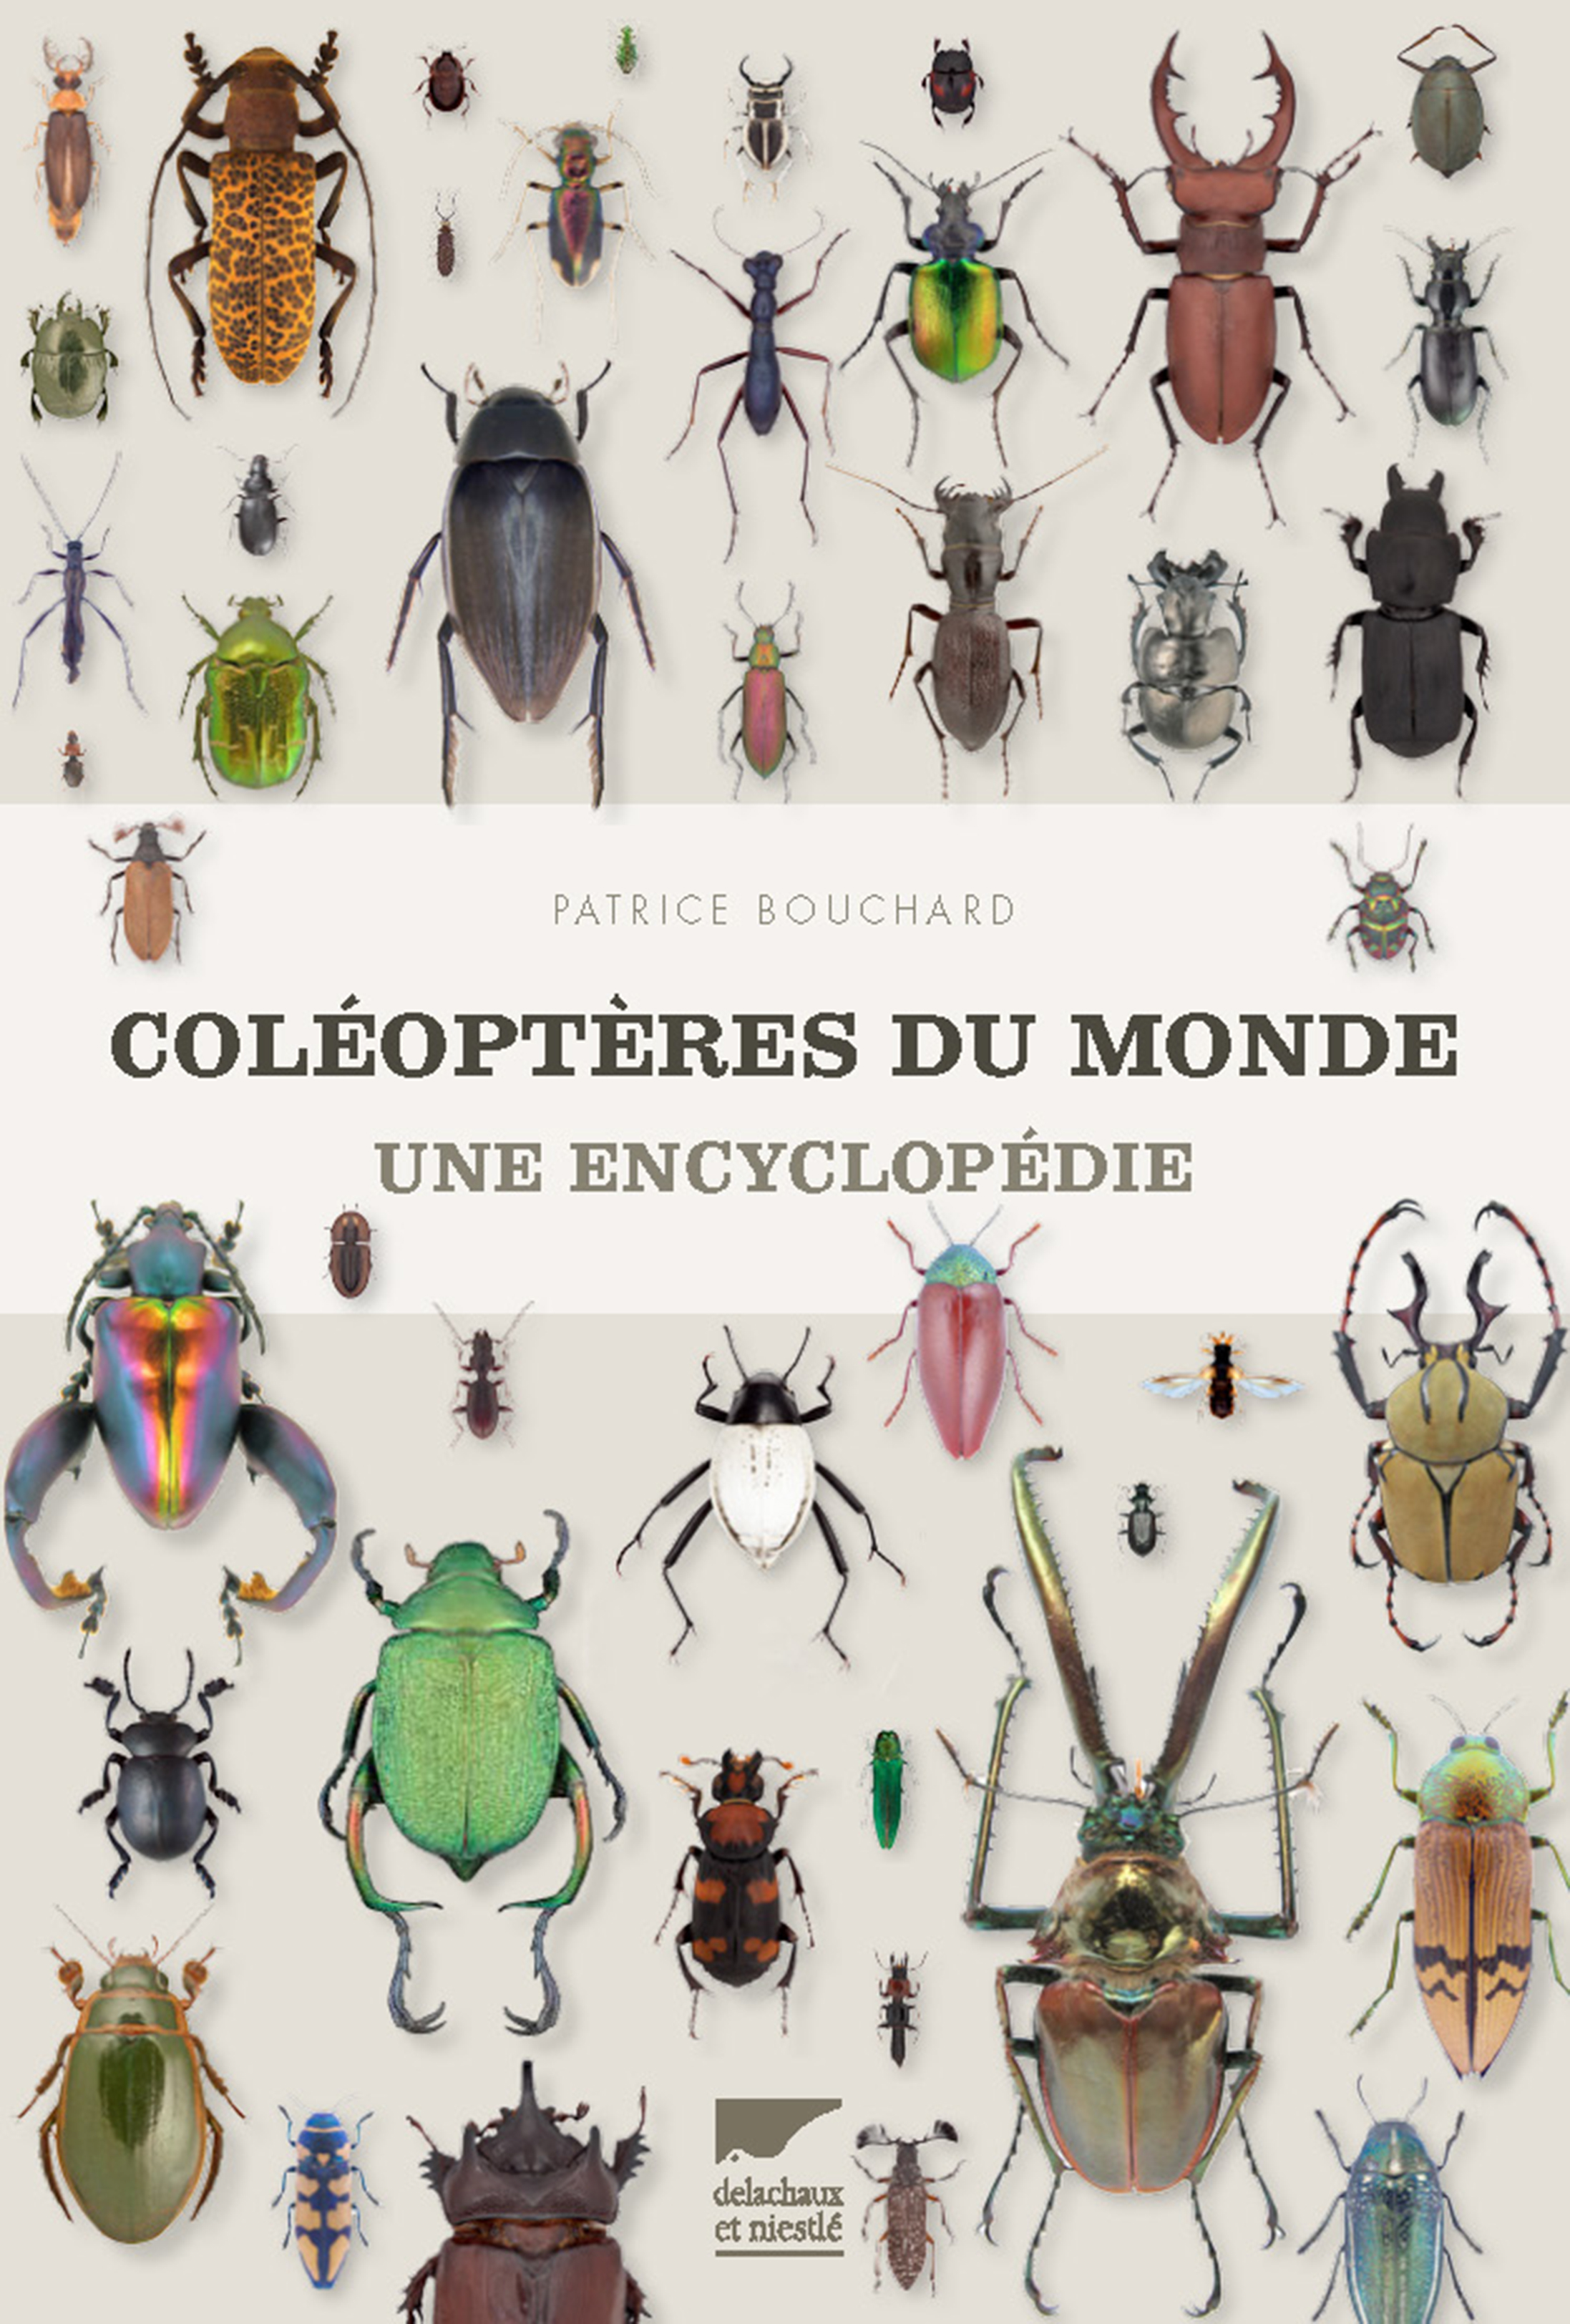 Beetles of the world: an encyclopedia – Interview of Patrice Bouchard